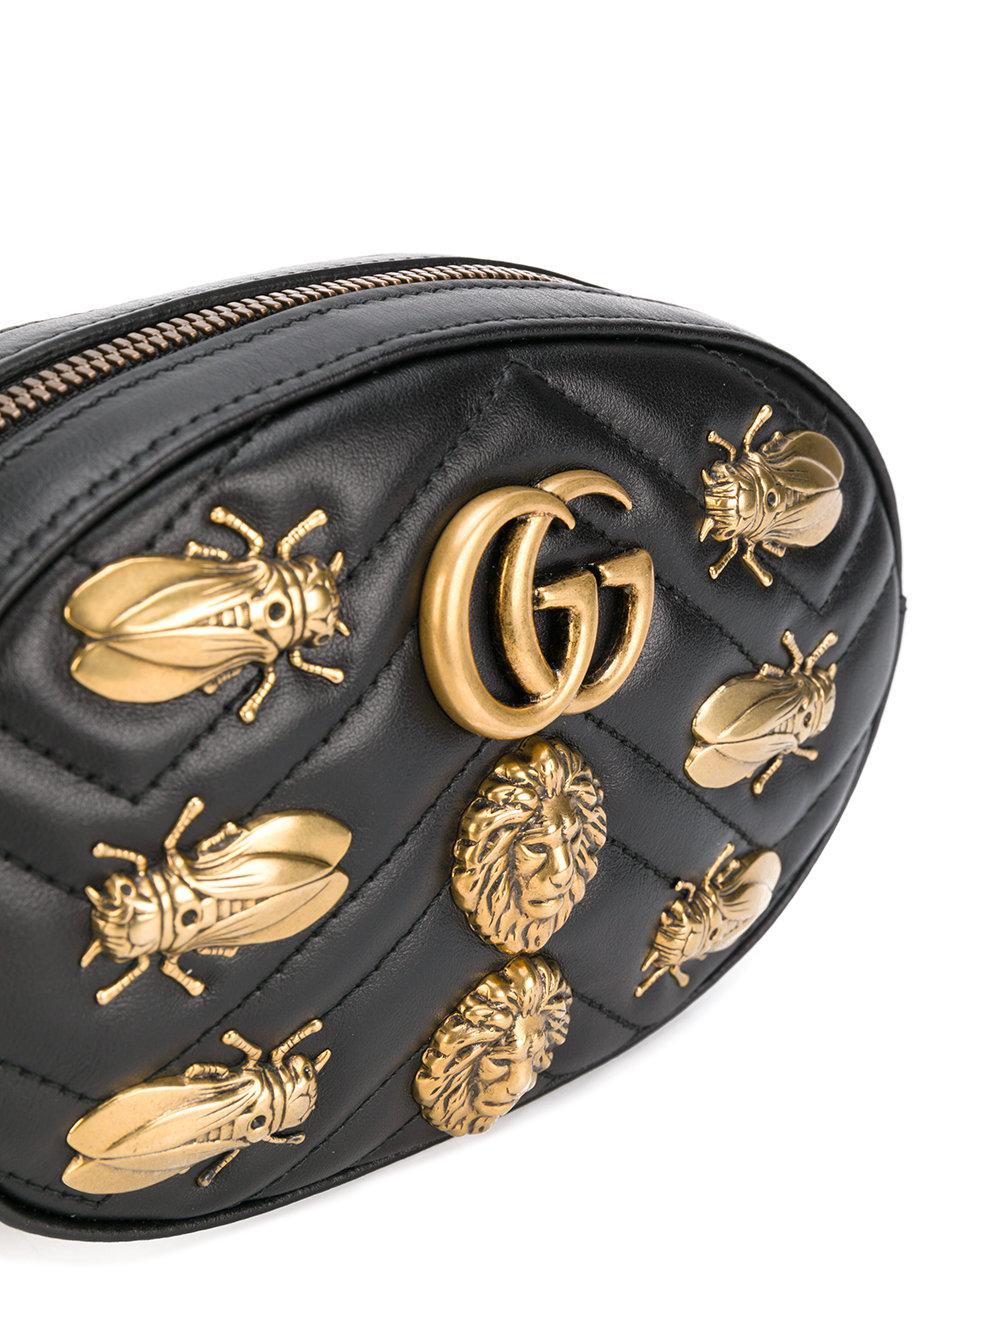 Best Of gg marmont belt bag blue A new introduction in the gg marmont ...